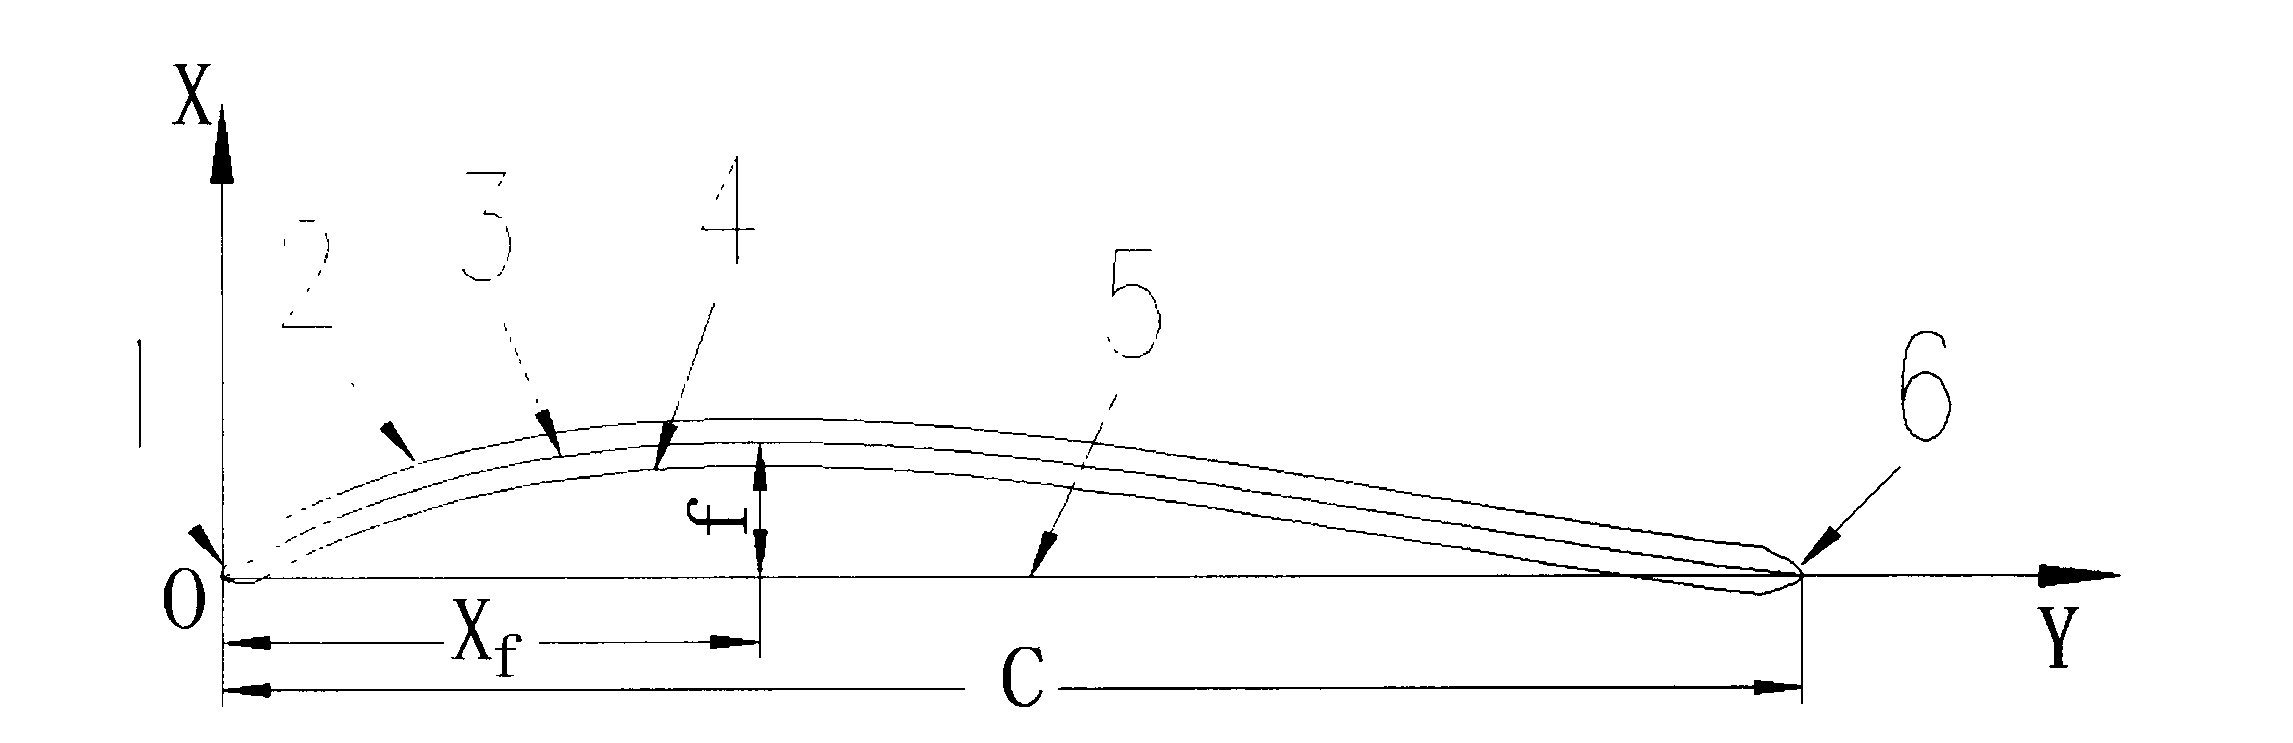 Variable-curvature arc equal-thickness plate wing section for fan group